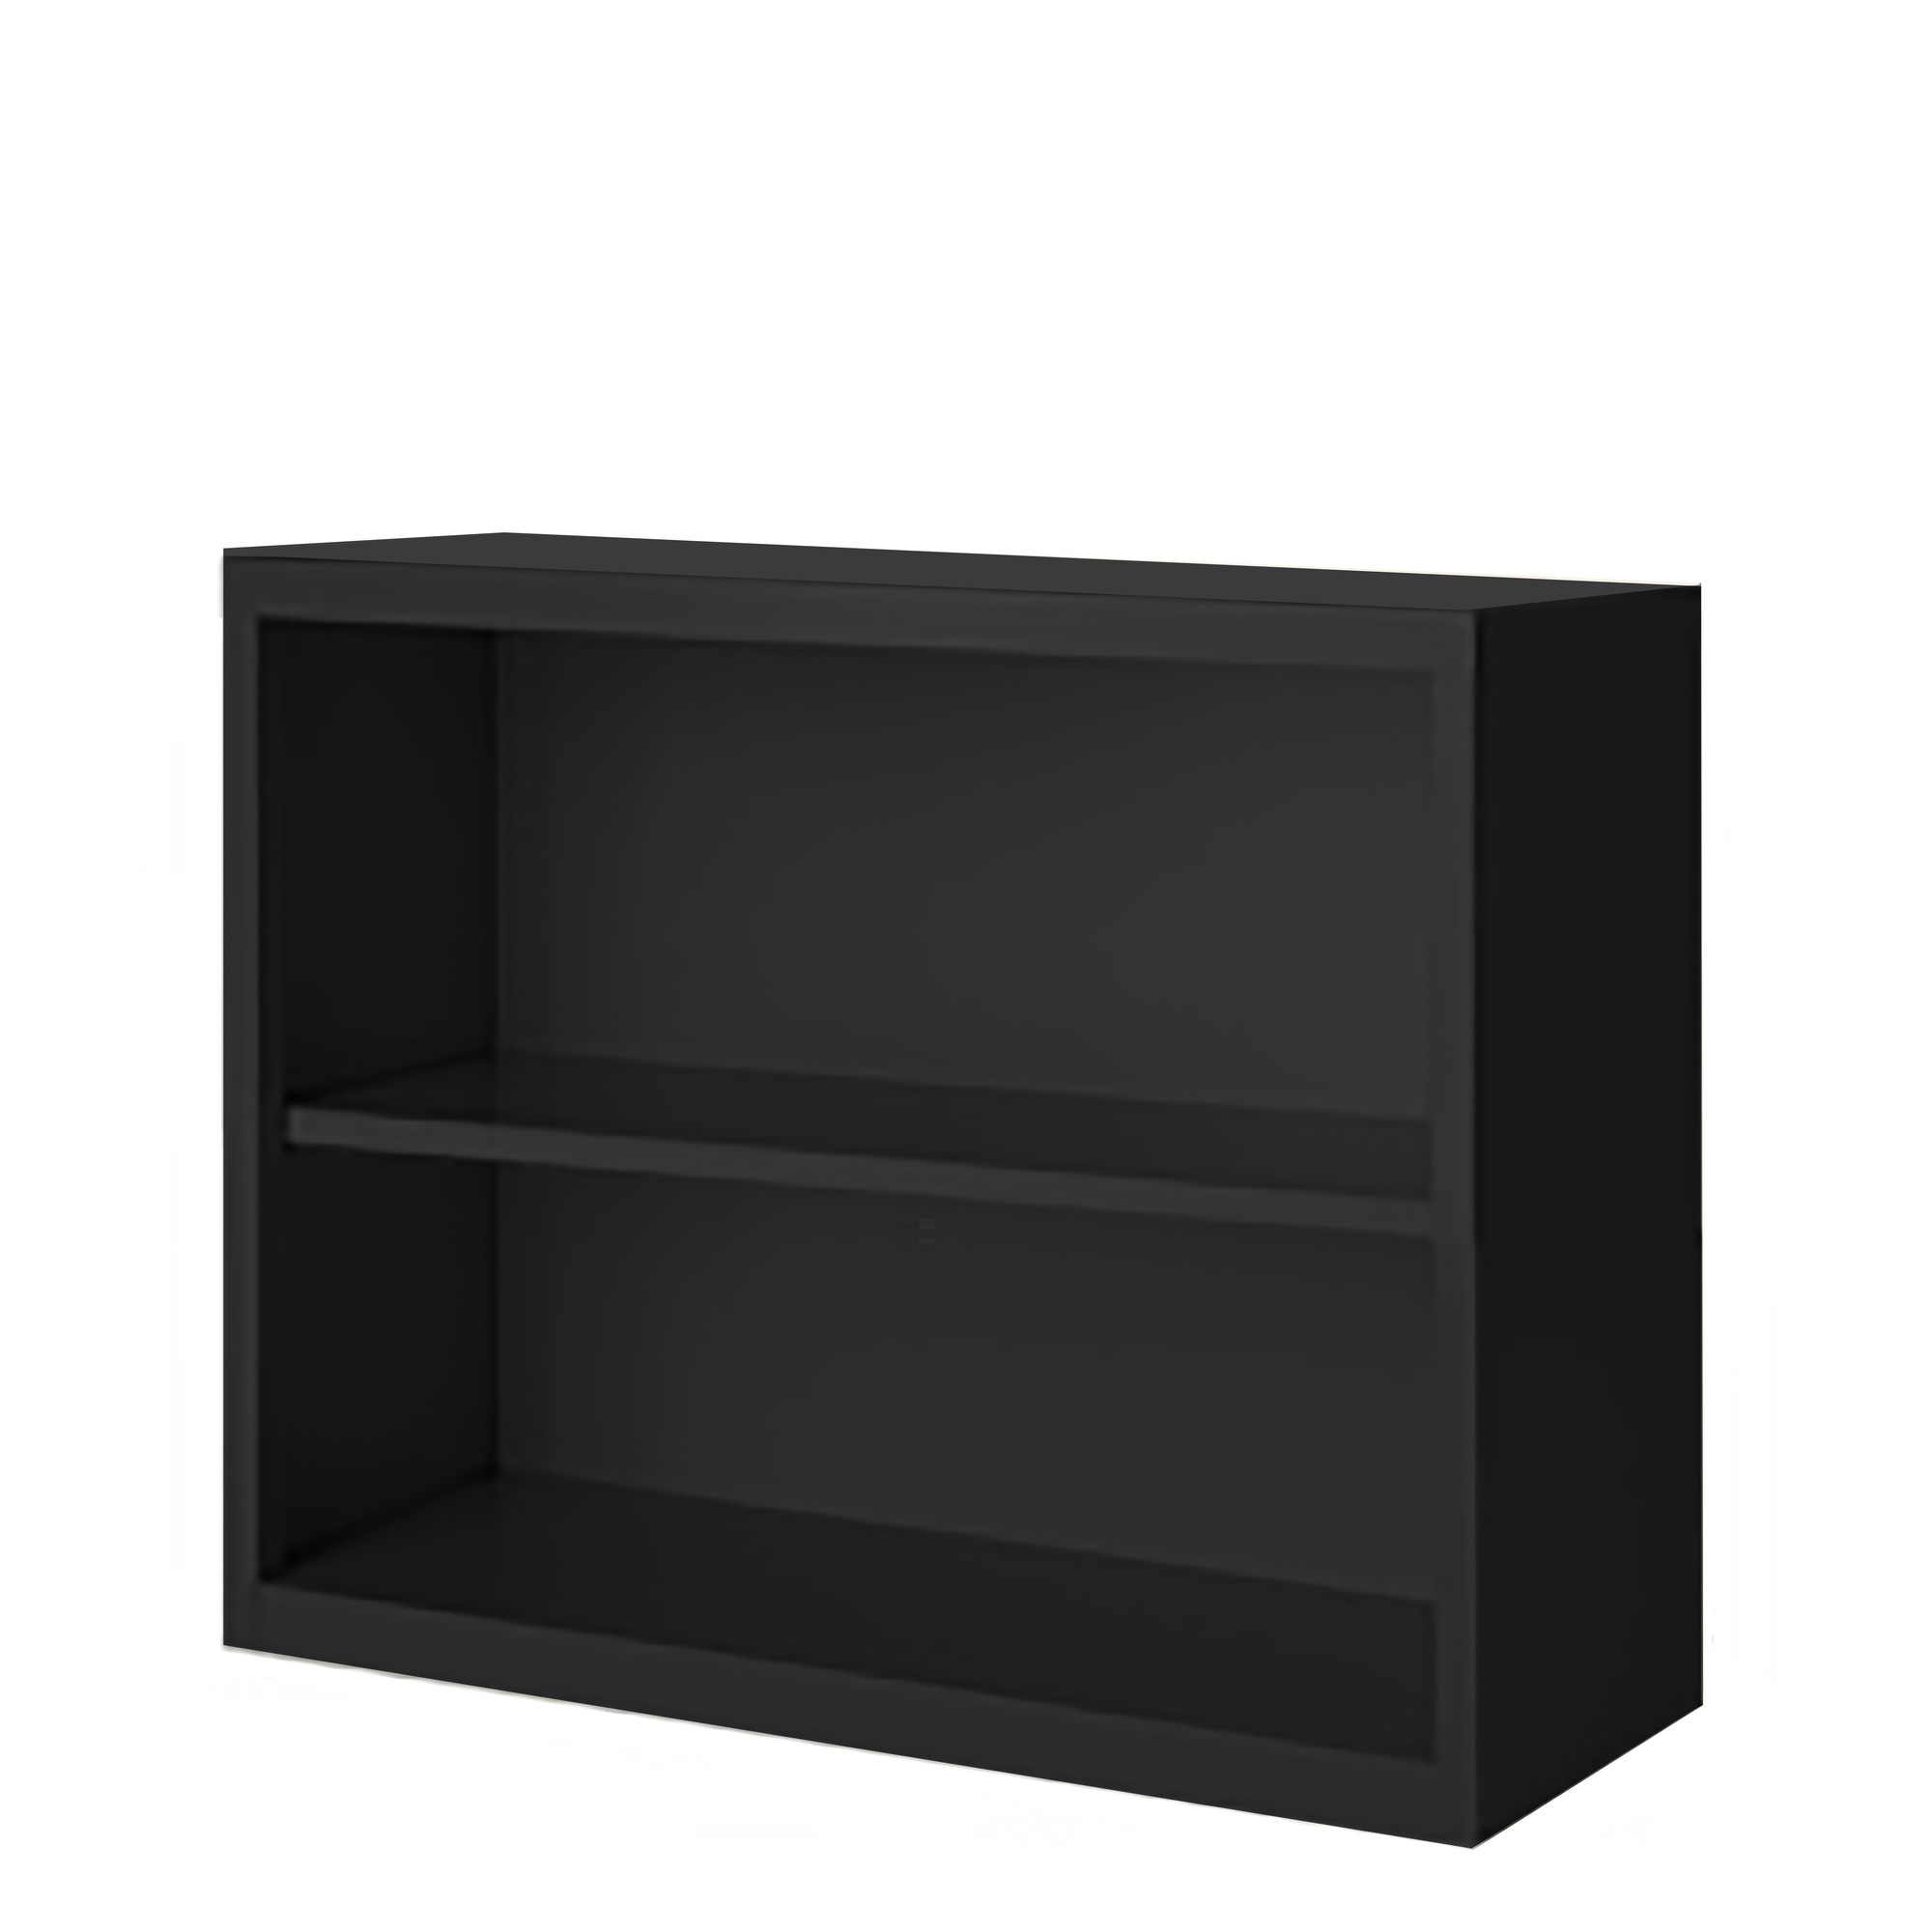 Steel Cabinets USA, 36Inchx18Inchx30Inch Black Bookcase Steel Fully Assembled, Height 30 in, Shelves (qty.) 2, Material Steel, Model BCA-363018-B